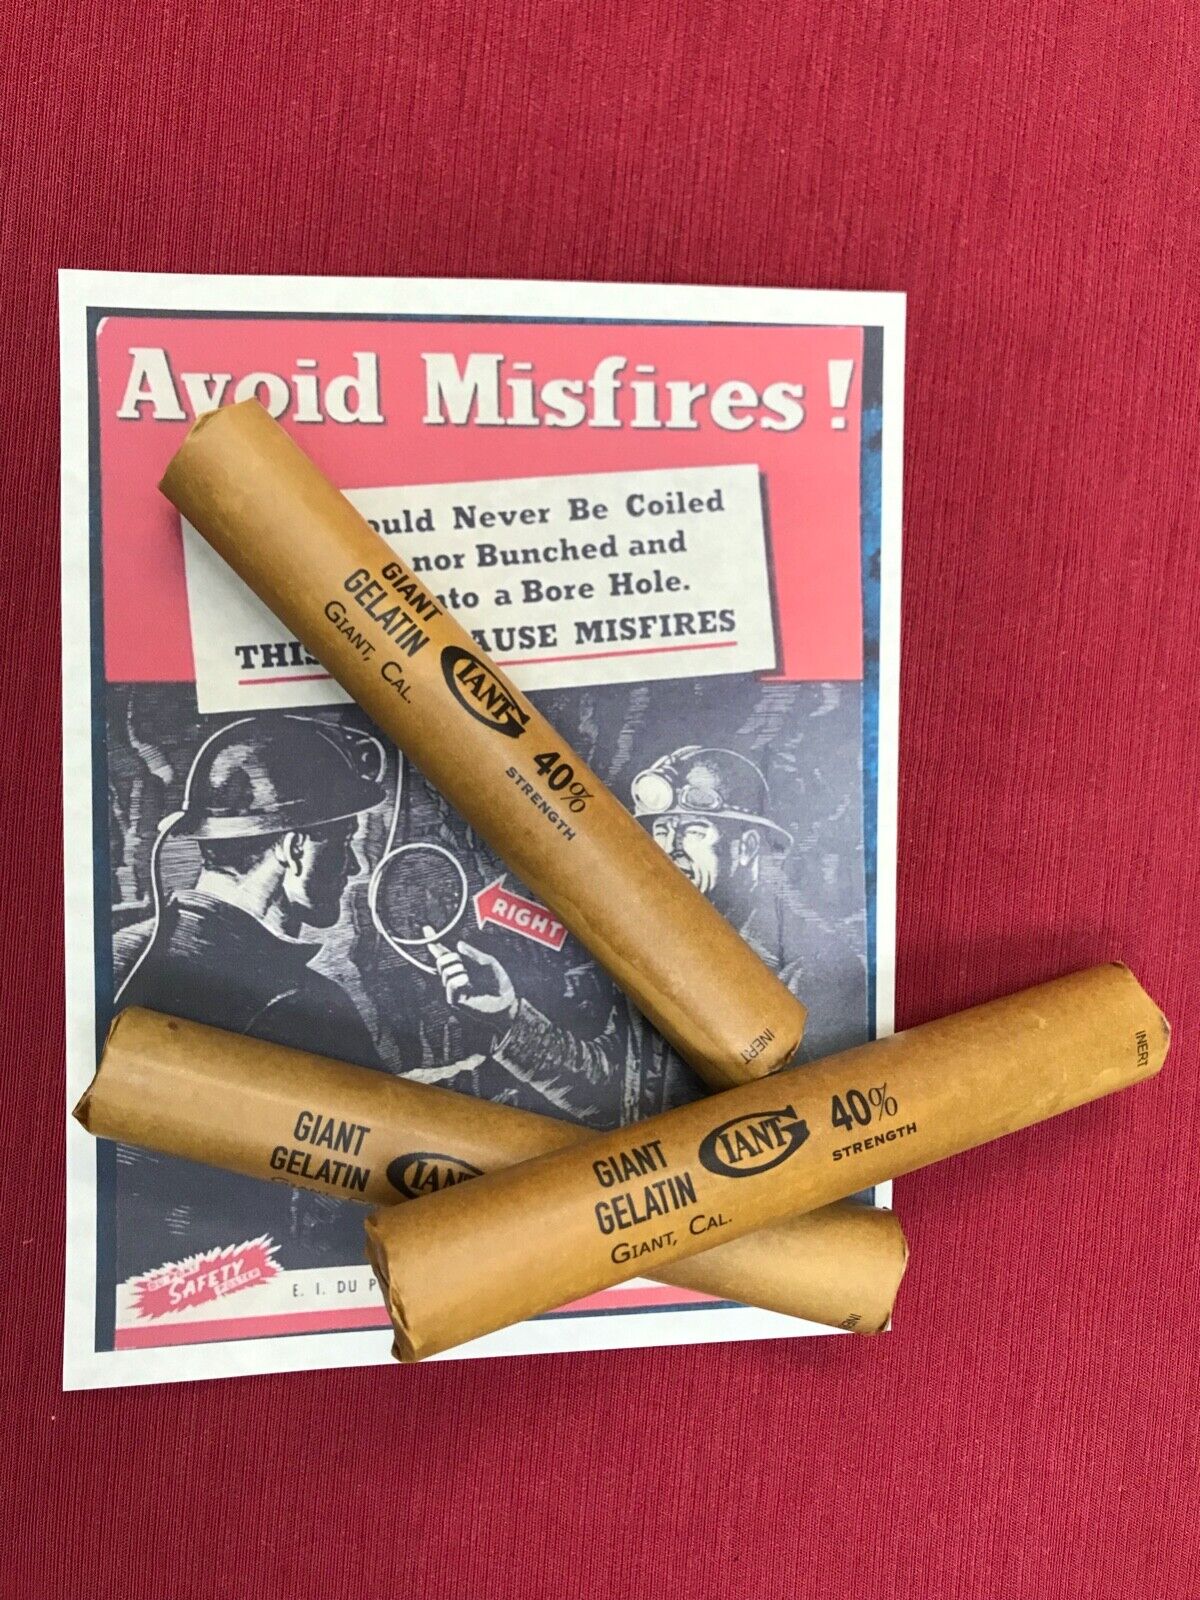 inert dynamite sticks, set of 3 with safety poster, replica airsoft mining